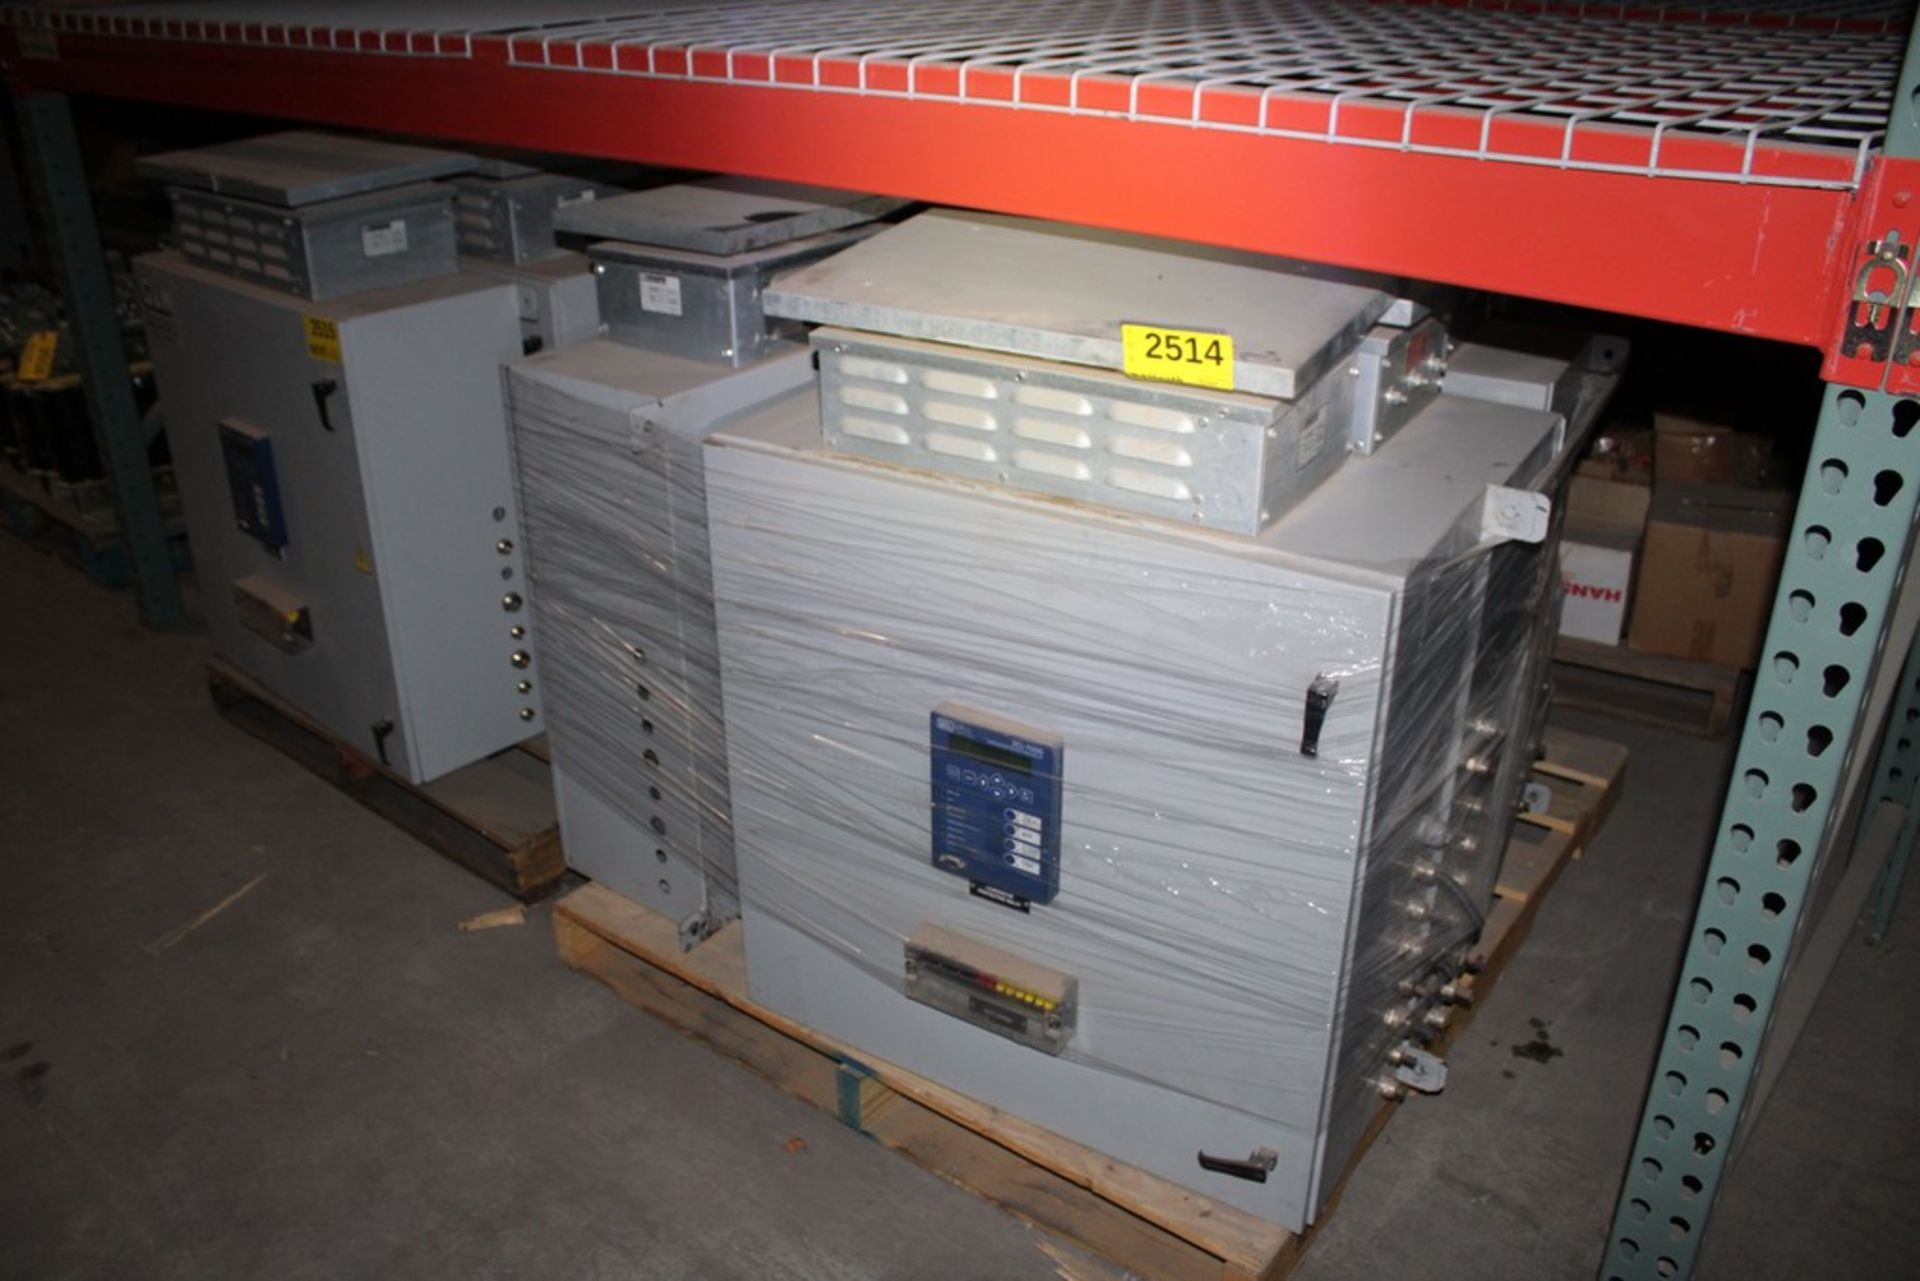 (4) POWEROHM MODEL P17636-53-TB6X53 BOXES WITH SCHWEITZER SEL-7000 GENERATOR PROTECTION RELAY